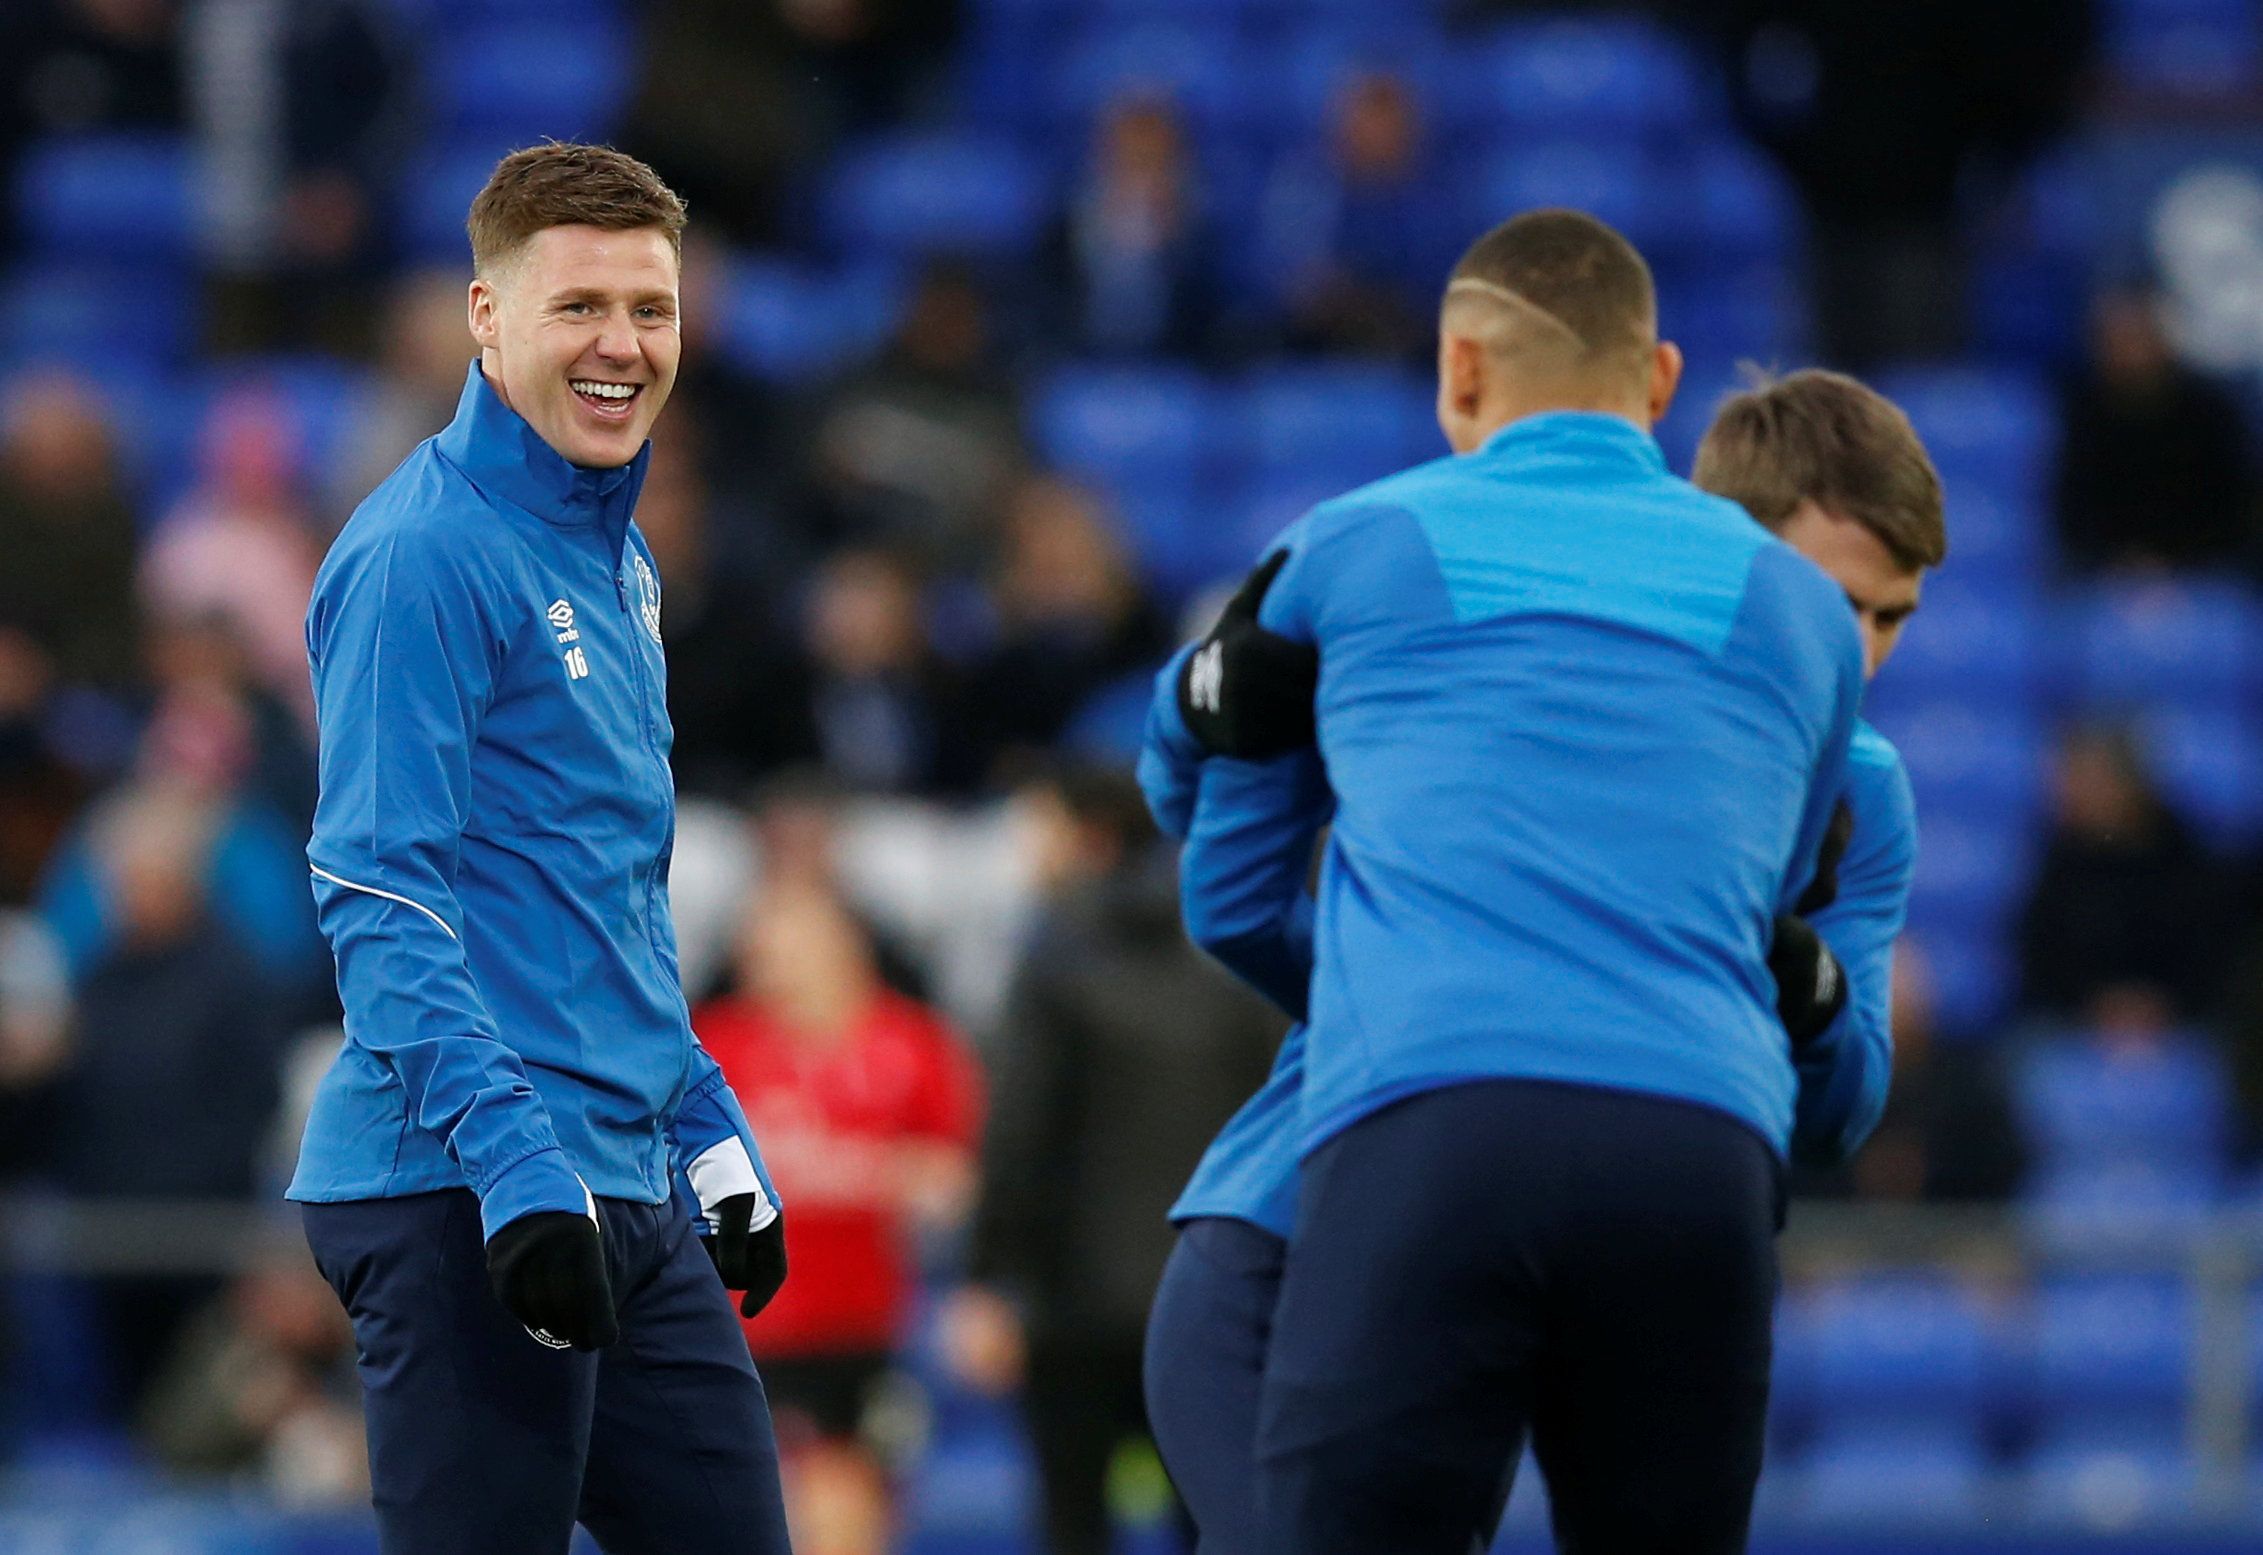 Soccer Football - FA Cup Third Round - Everton v Lincoln City - Goodison Park, Liverpool, Britain - January 5, 2019  Everton's James McCarthy during the warm up before the match    REUTERS/Andrew Yates